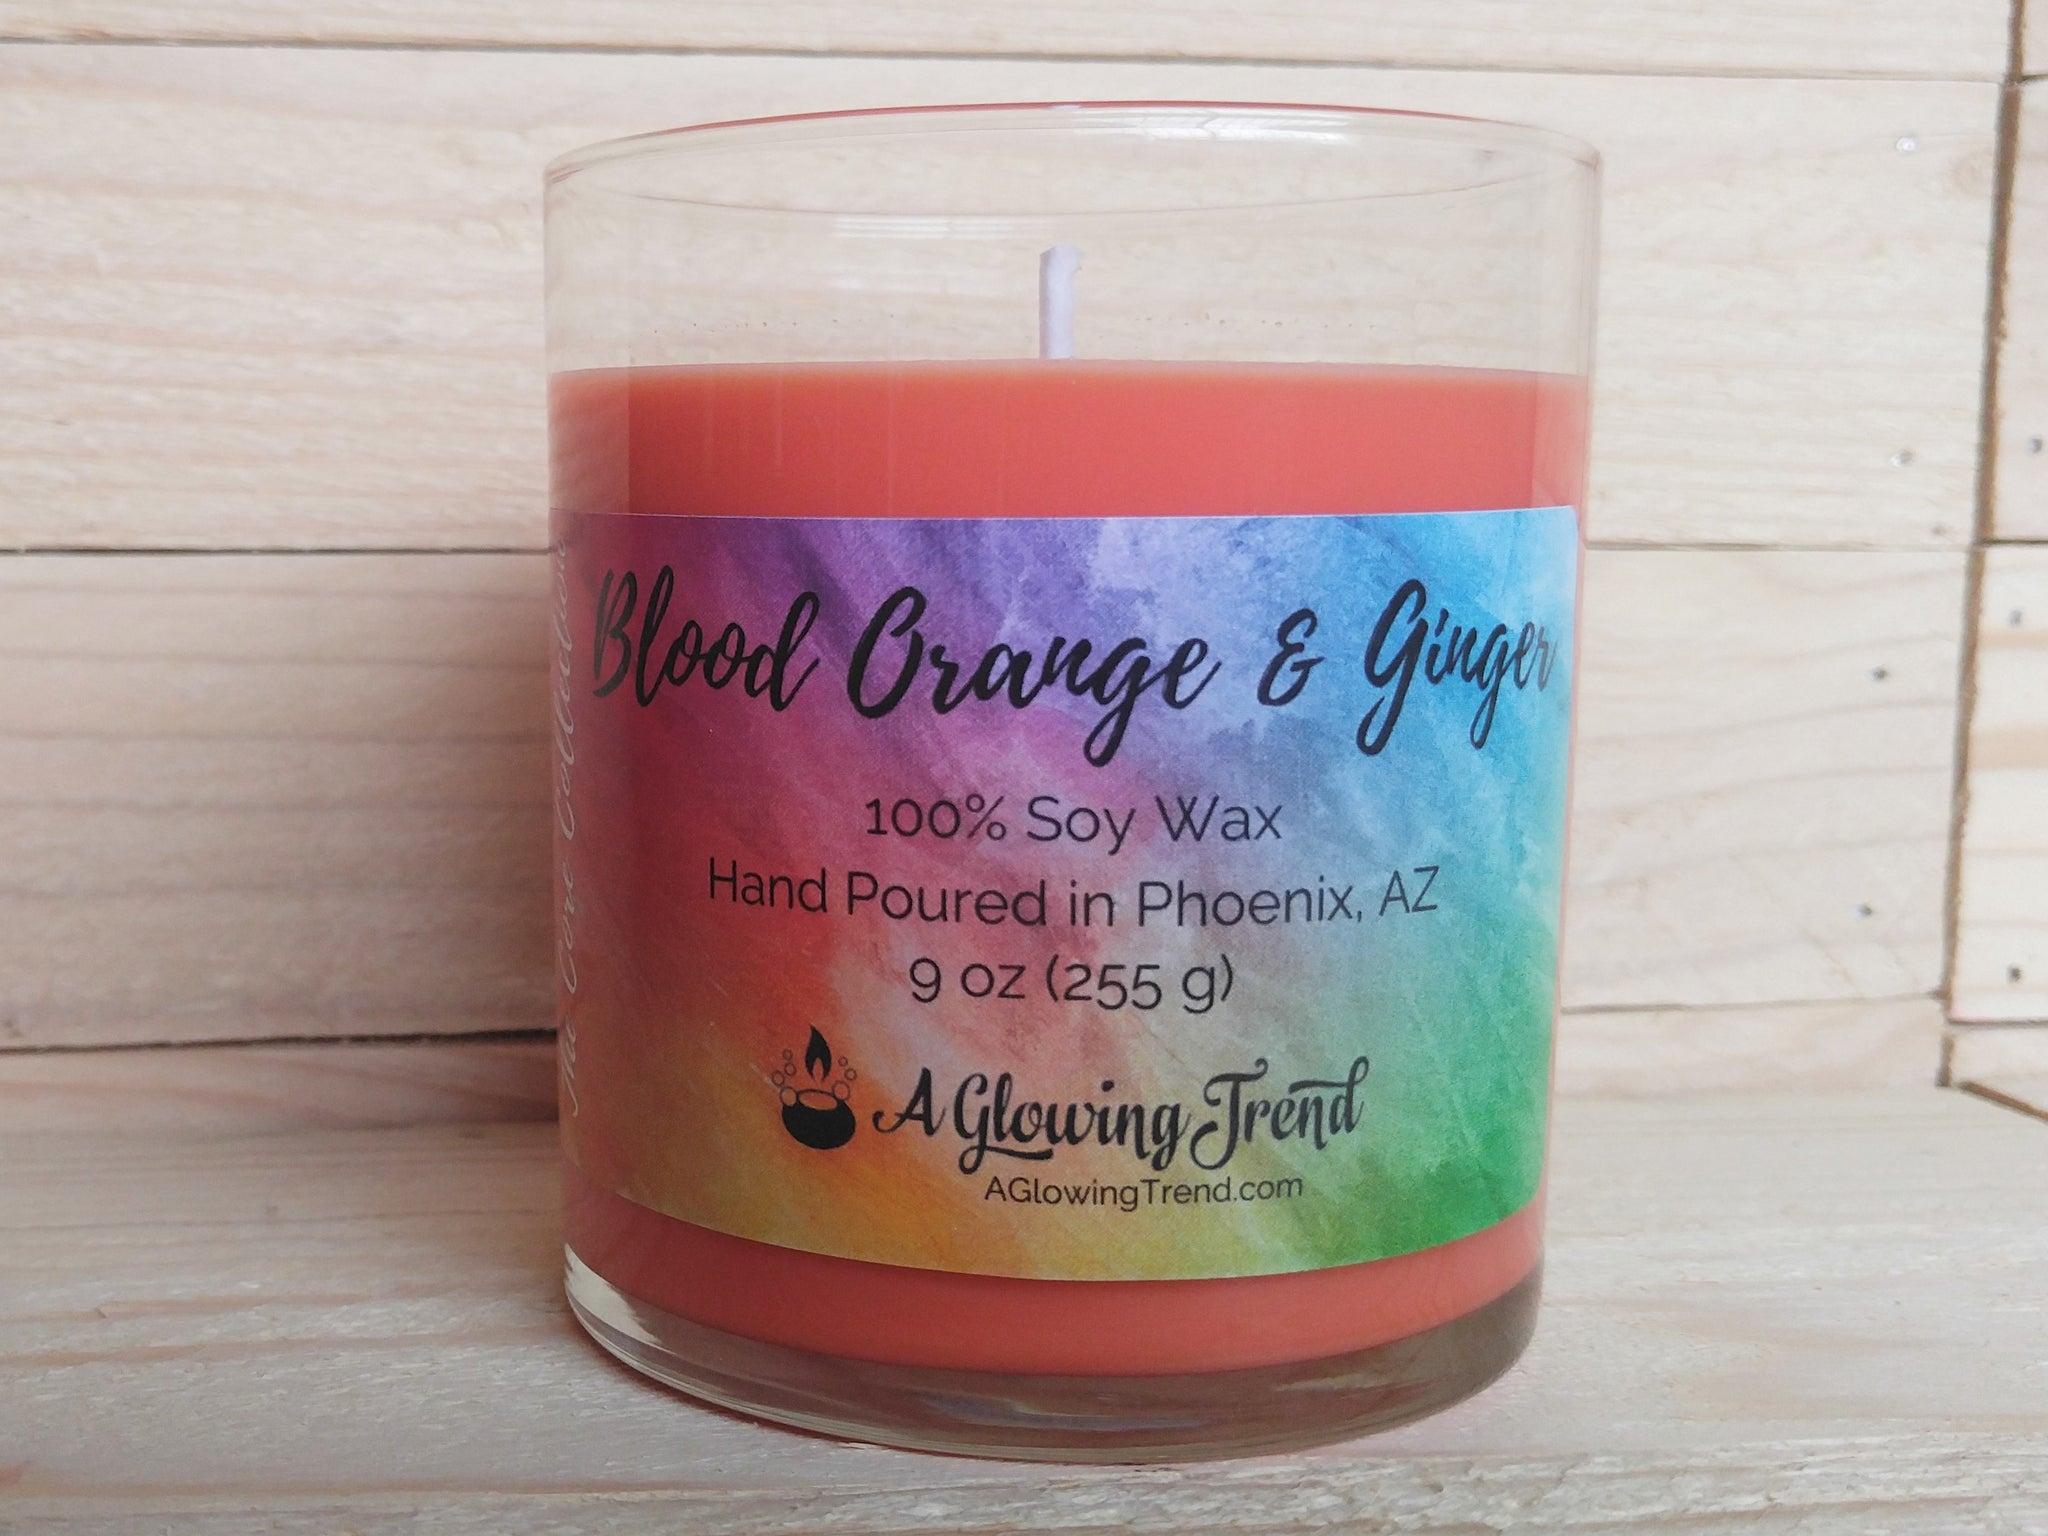 A 9 oz glass tumbler containing an orange Blood Orange and Ginger scented soy candle by A Glowing Trend